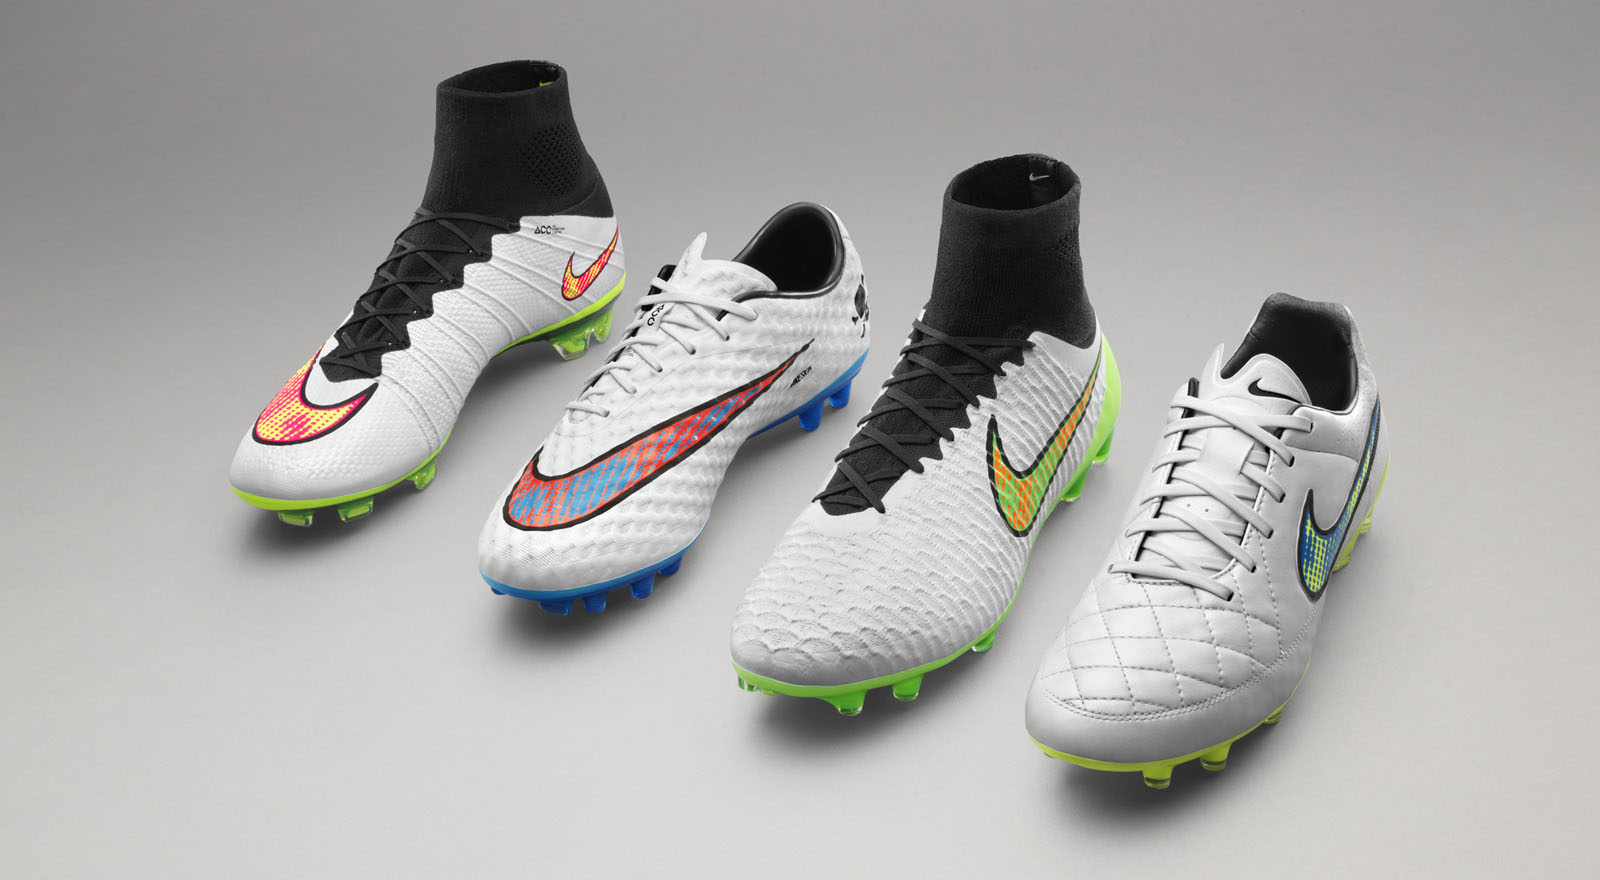 Nike-2015-White-Football-Boots-Pack - Wet Grass